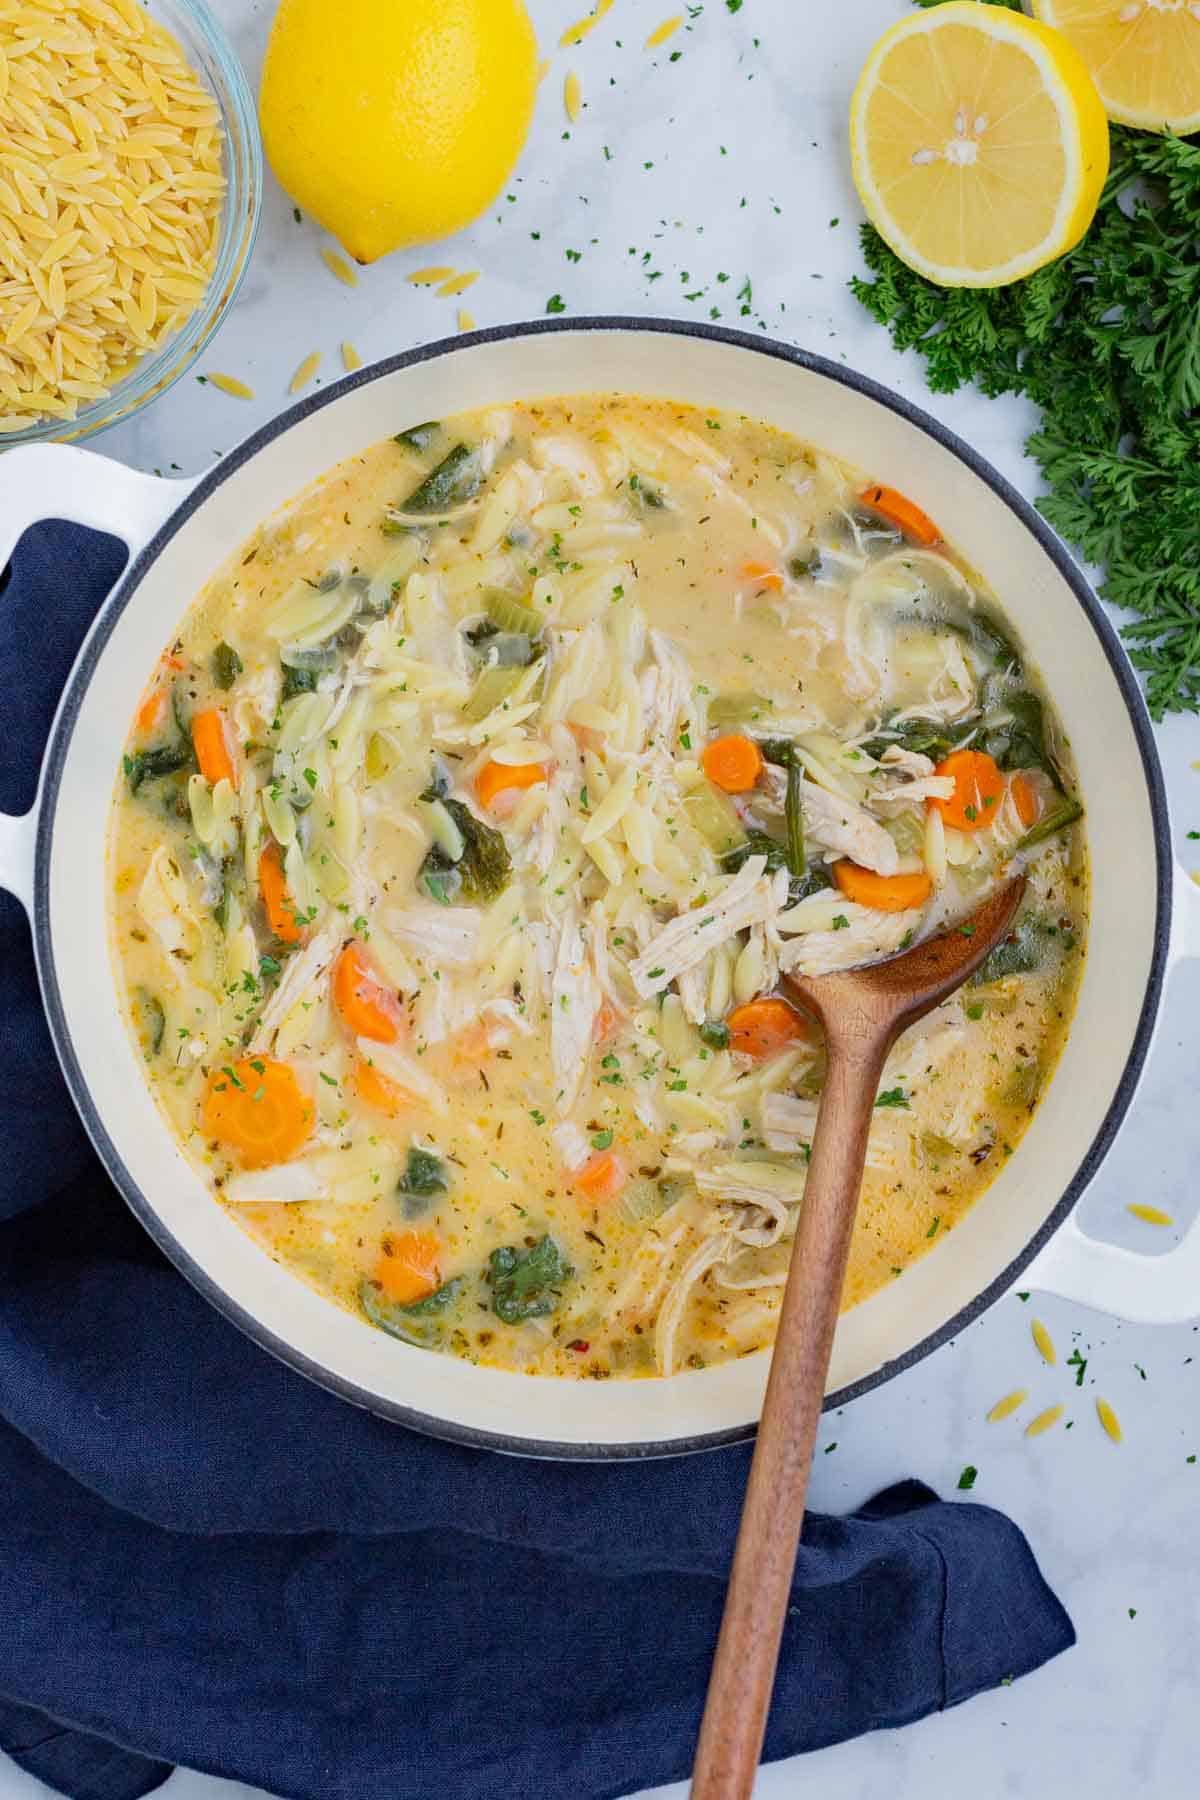 Lemon chicken orzo soup is full of healthy veggies, tender chicken, orzo pasta all in a creamy, lemony broth.